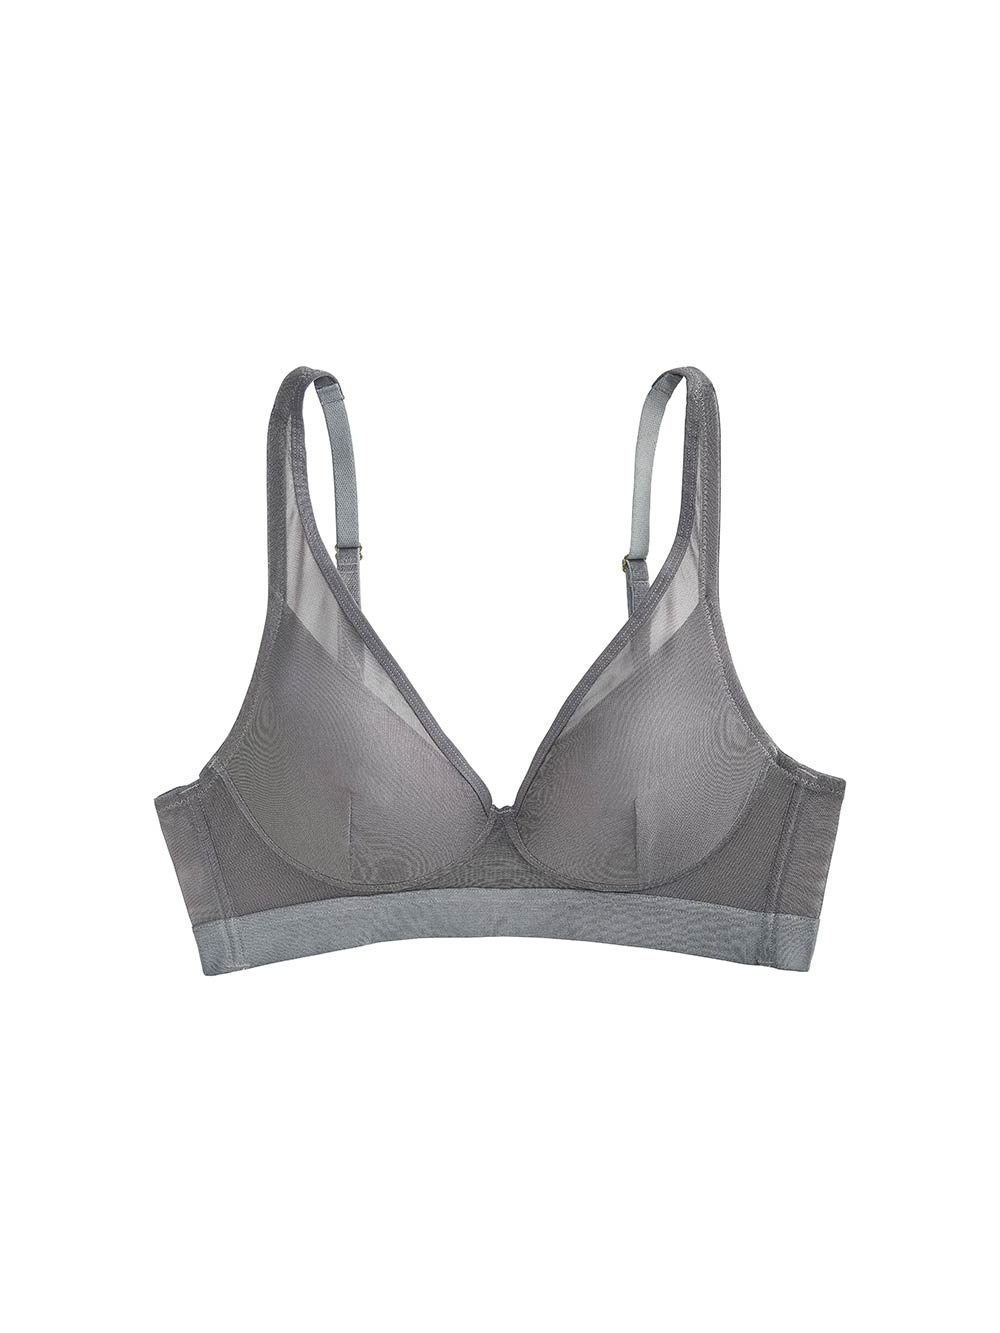 Wire-free bras that still offer lift and shape